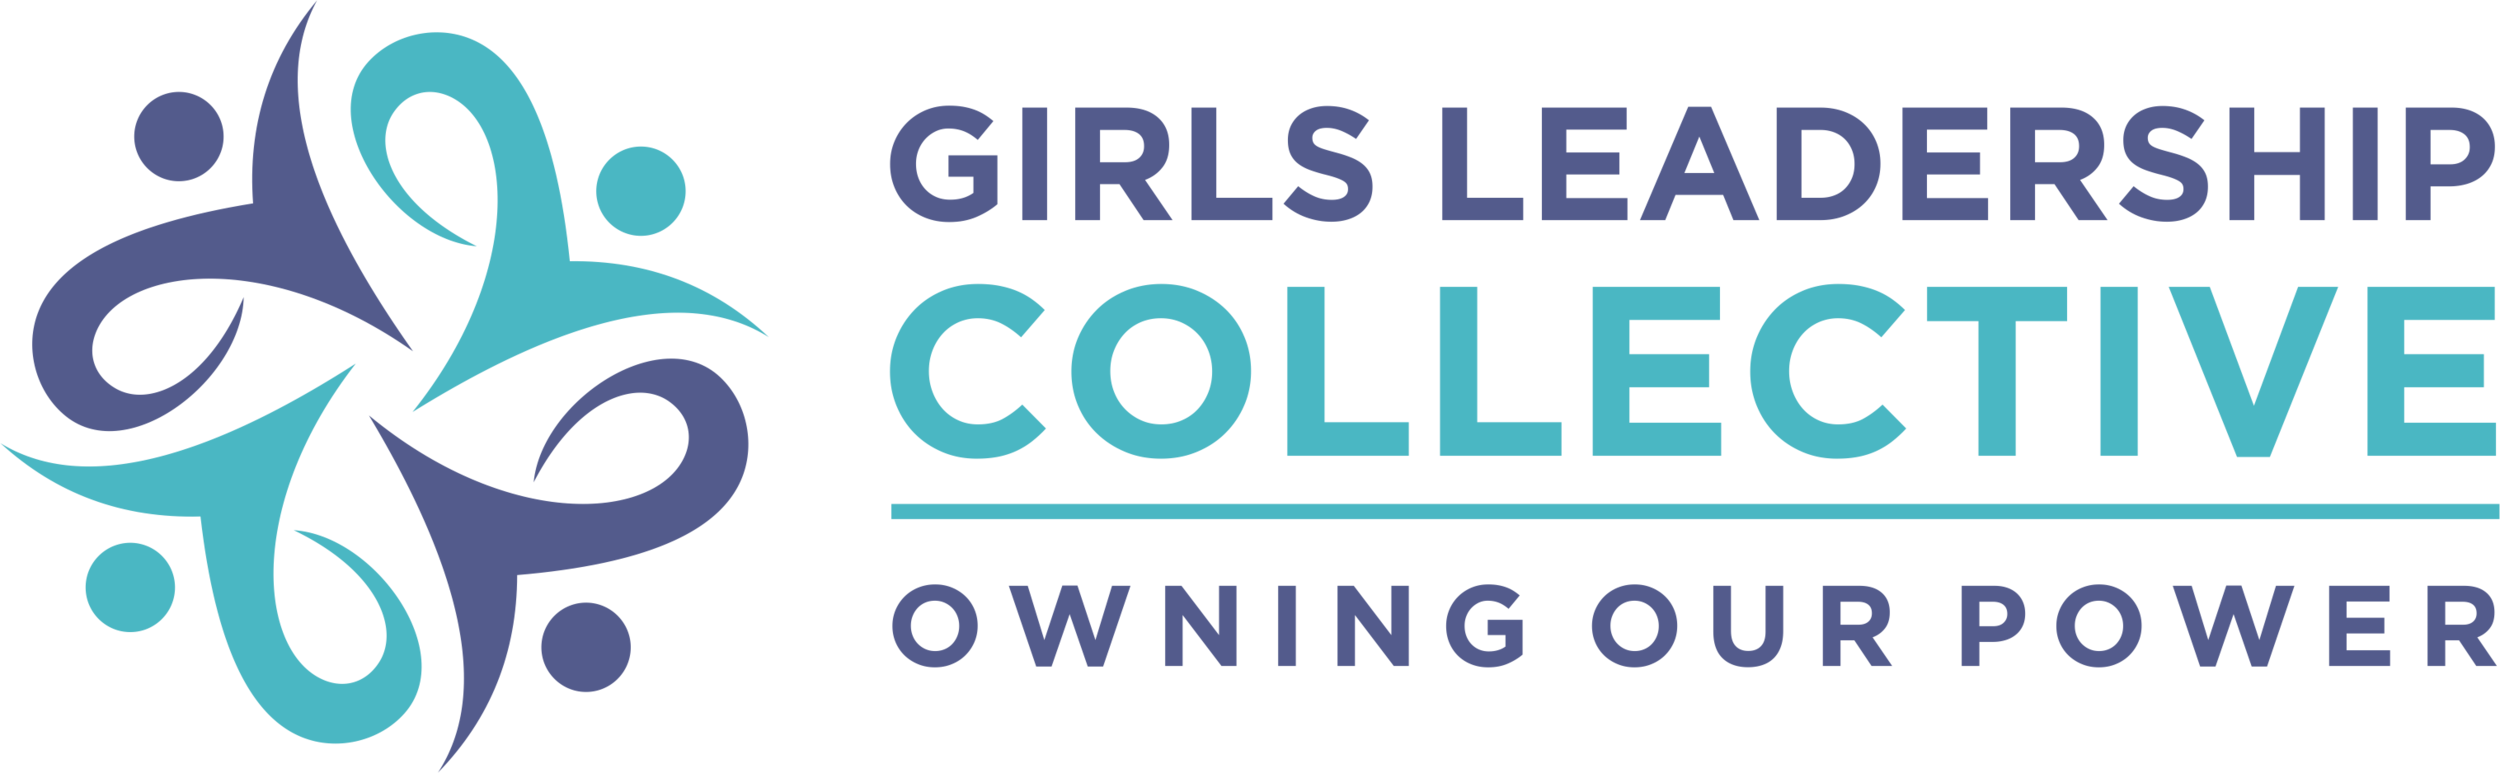 Girls Leadership Collective